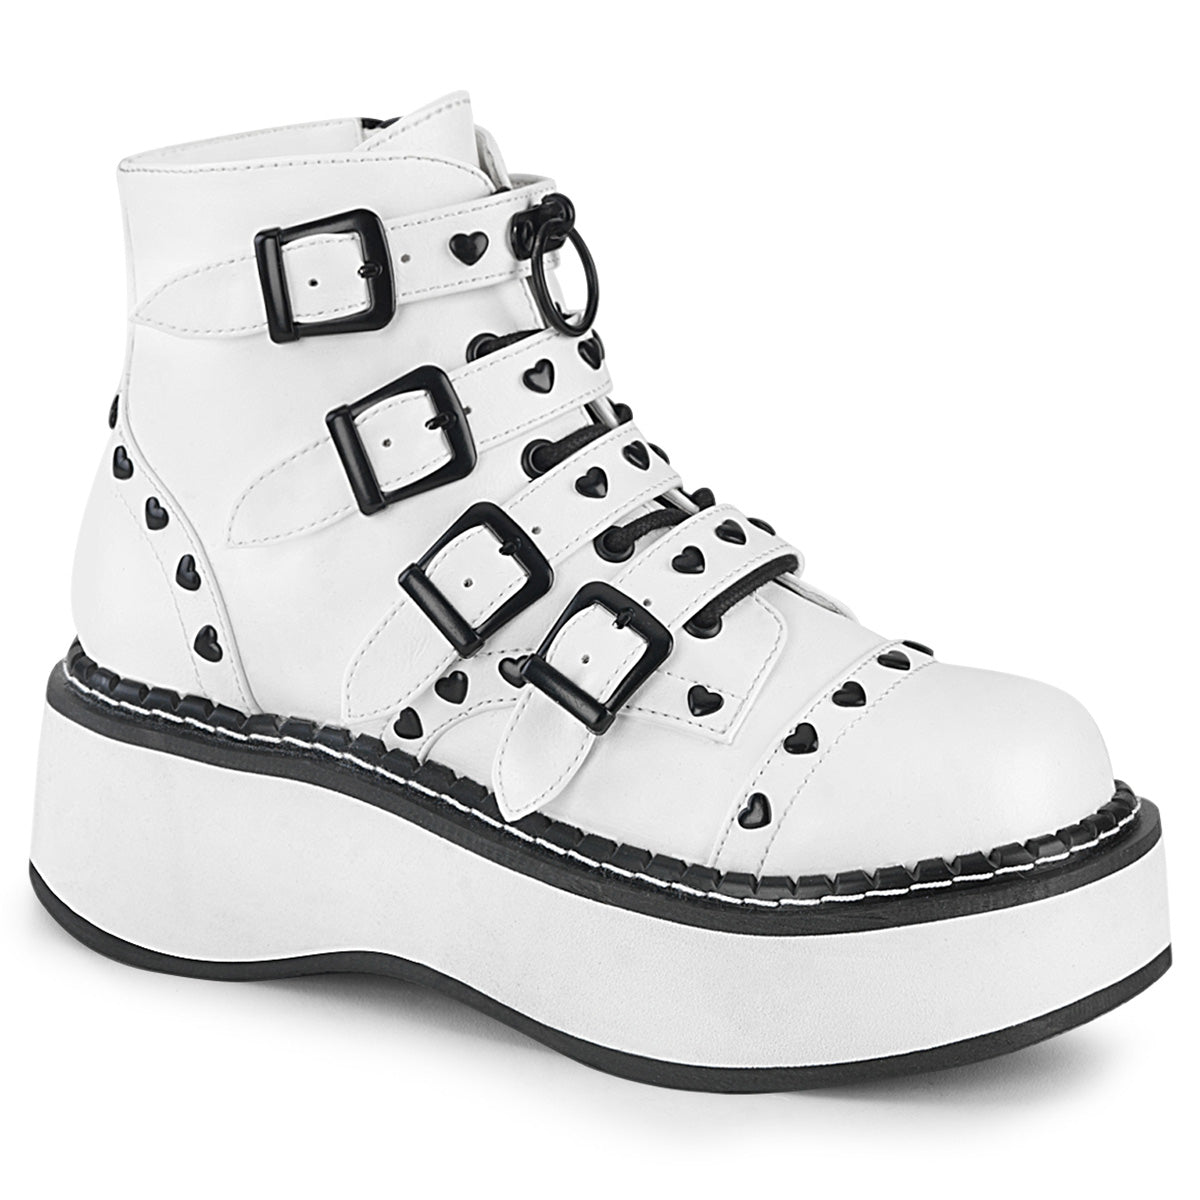 Too Fast | Demonia Emily 315 | White Vegan Leather Women's Ankle Boots